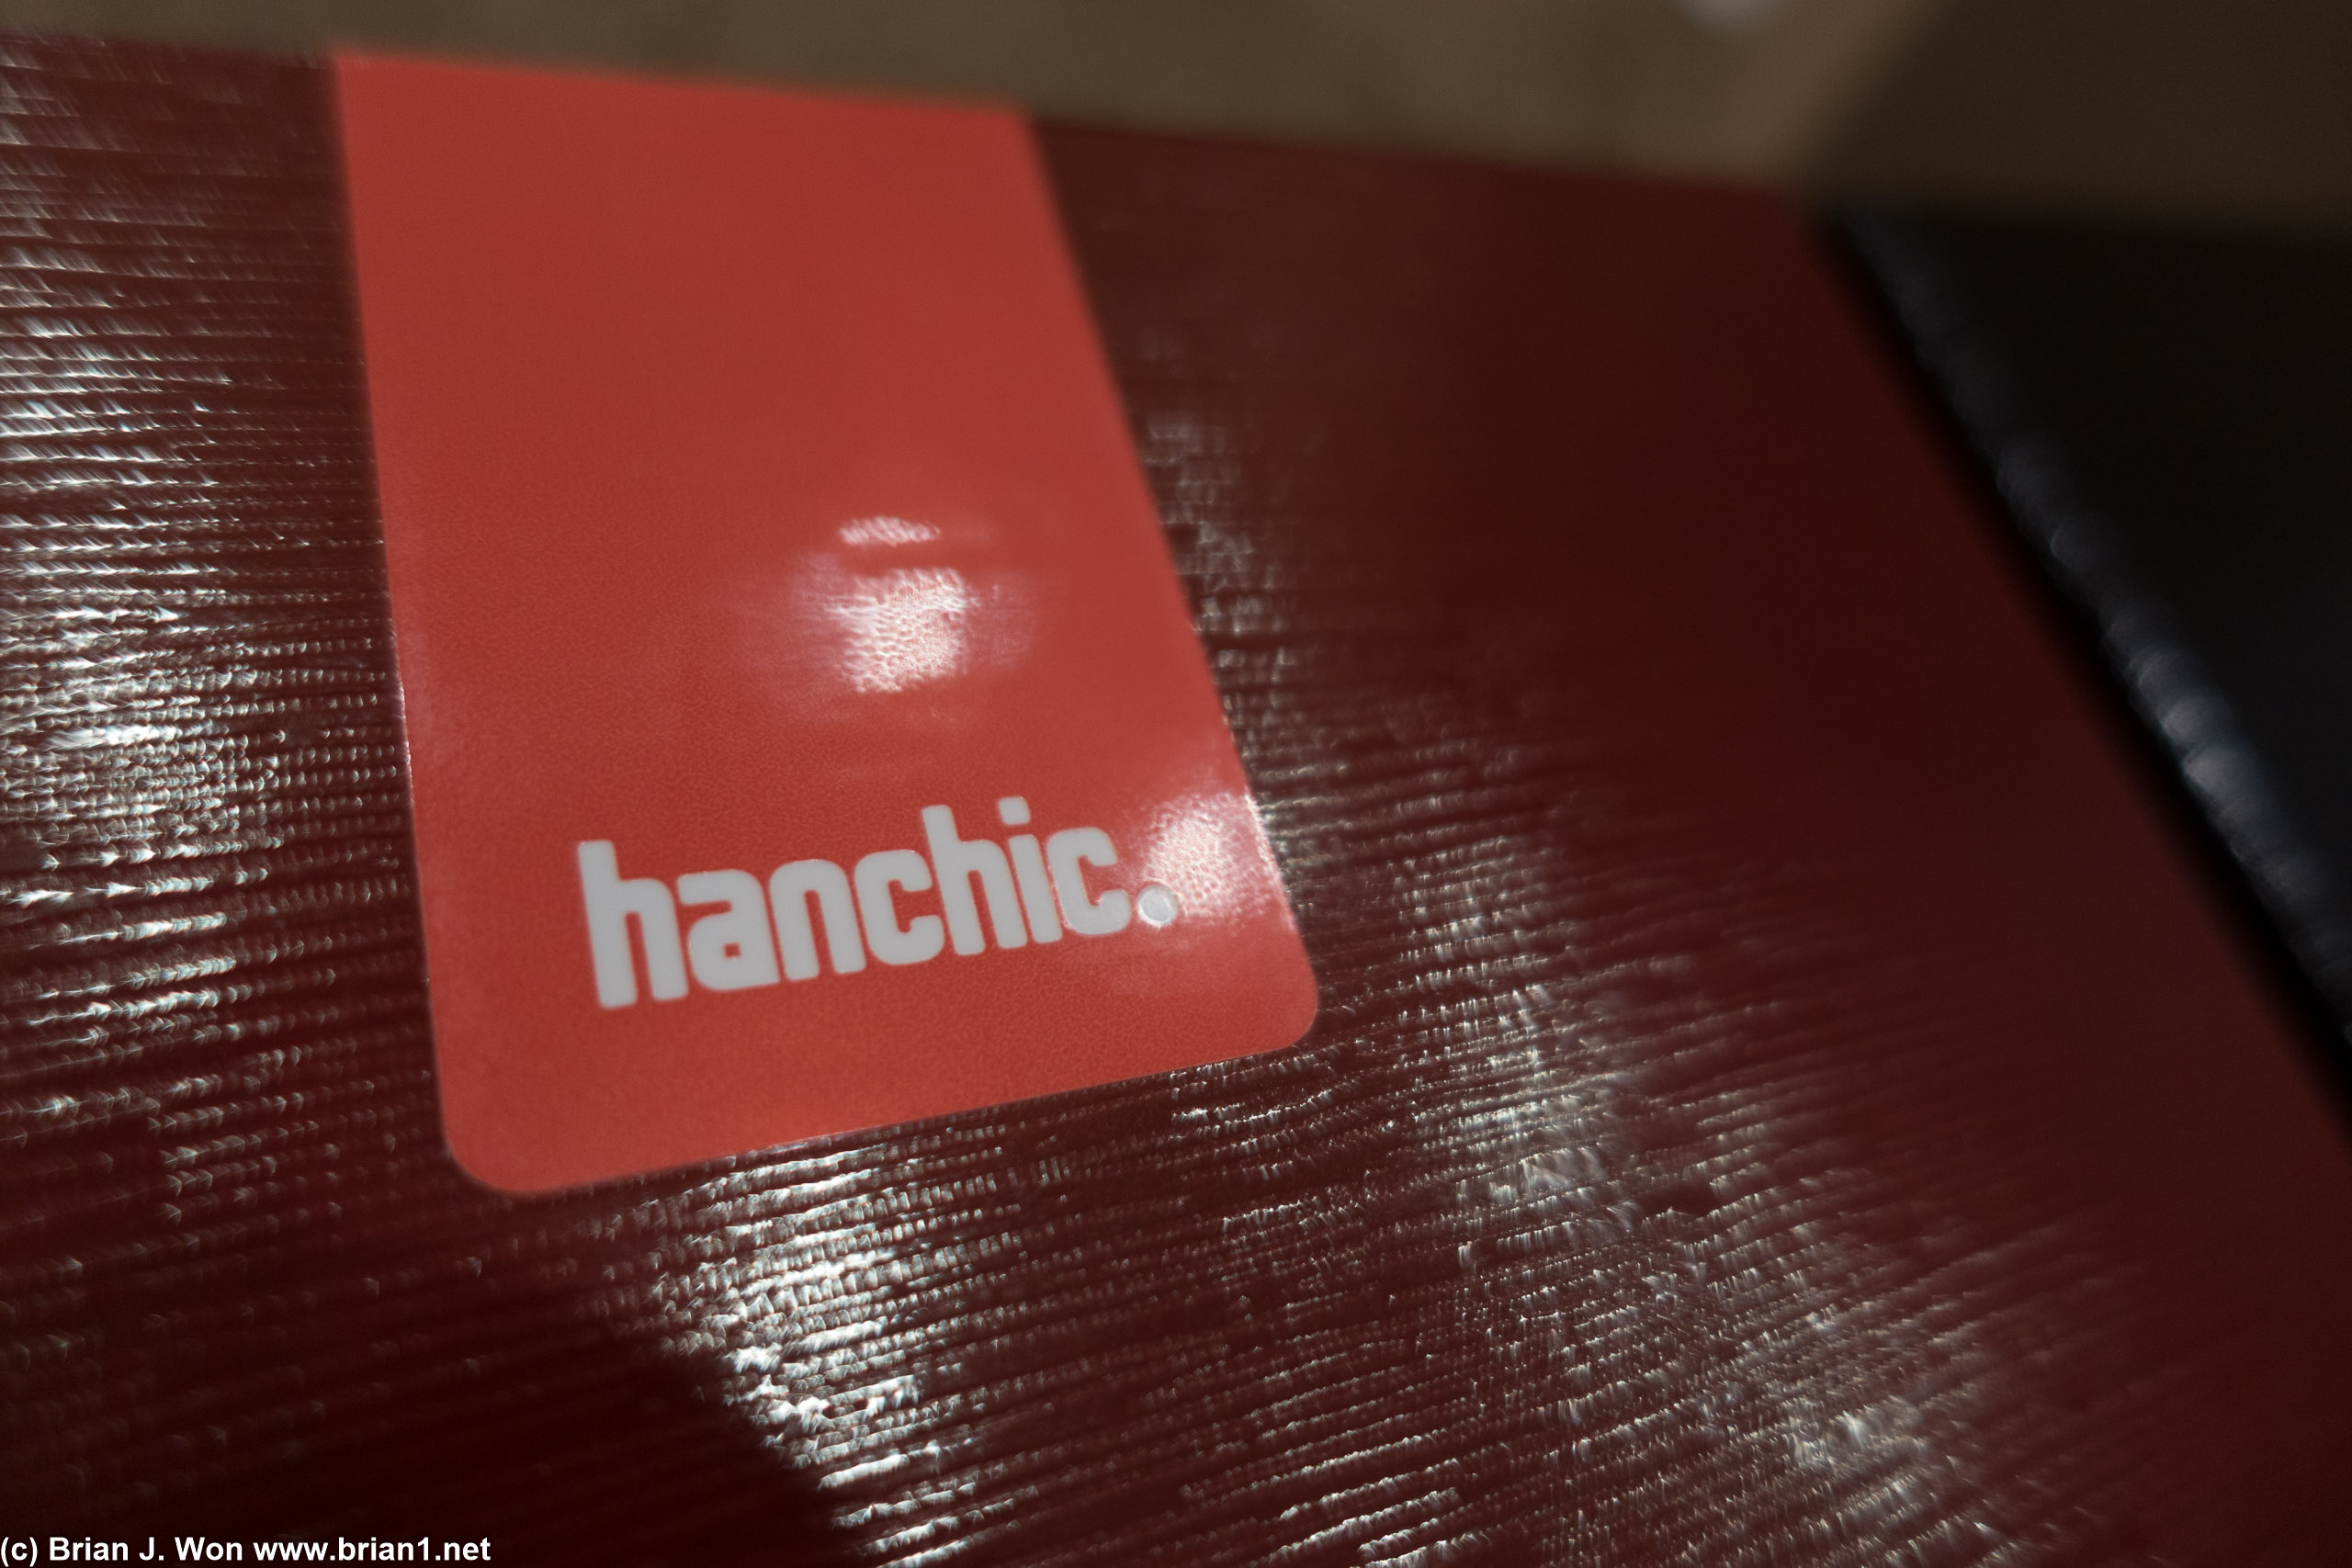 hanchic. did their share of the meal.